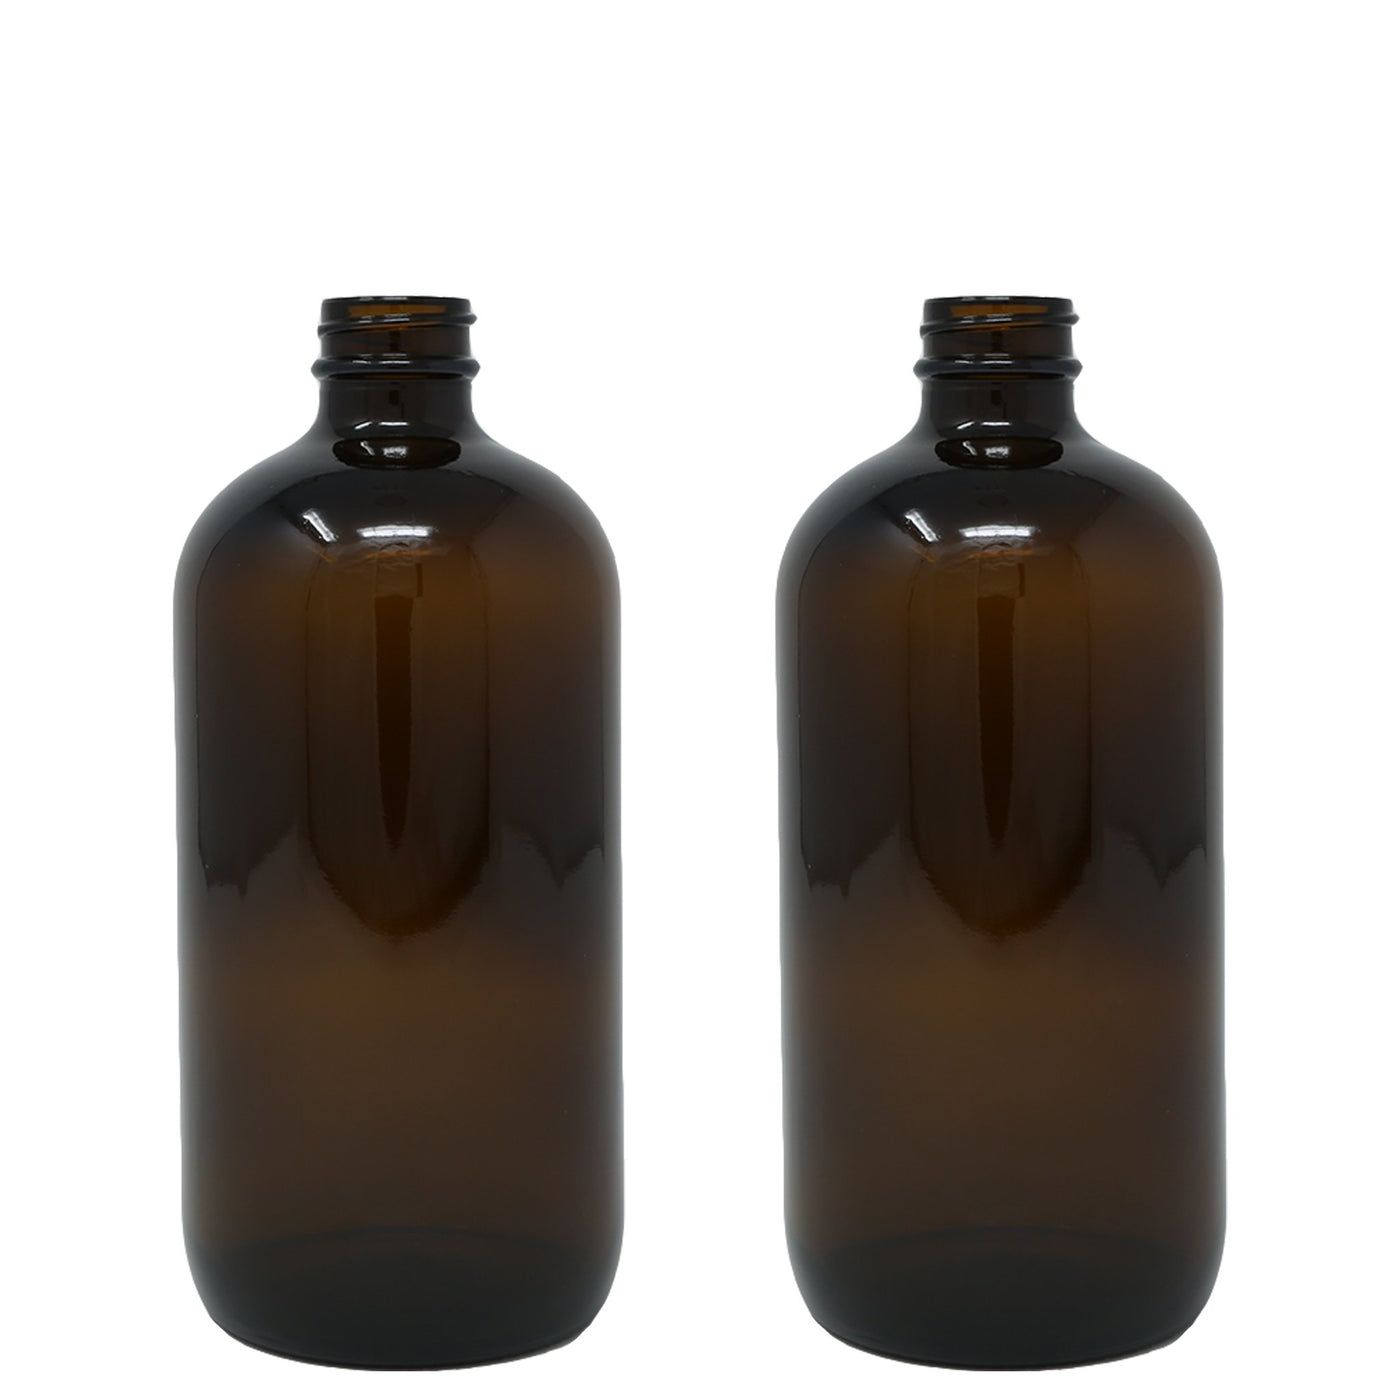 16 Oz (480 mL) Amber Glass Bottles, Caps Included